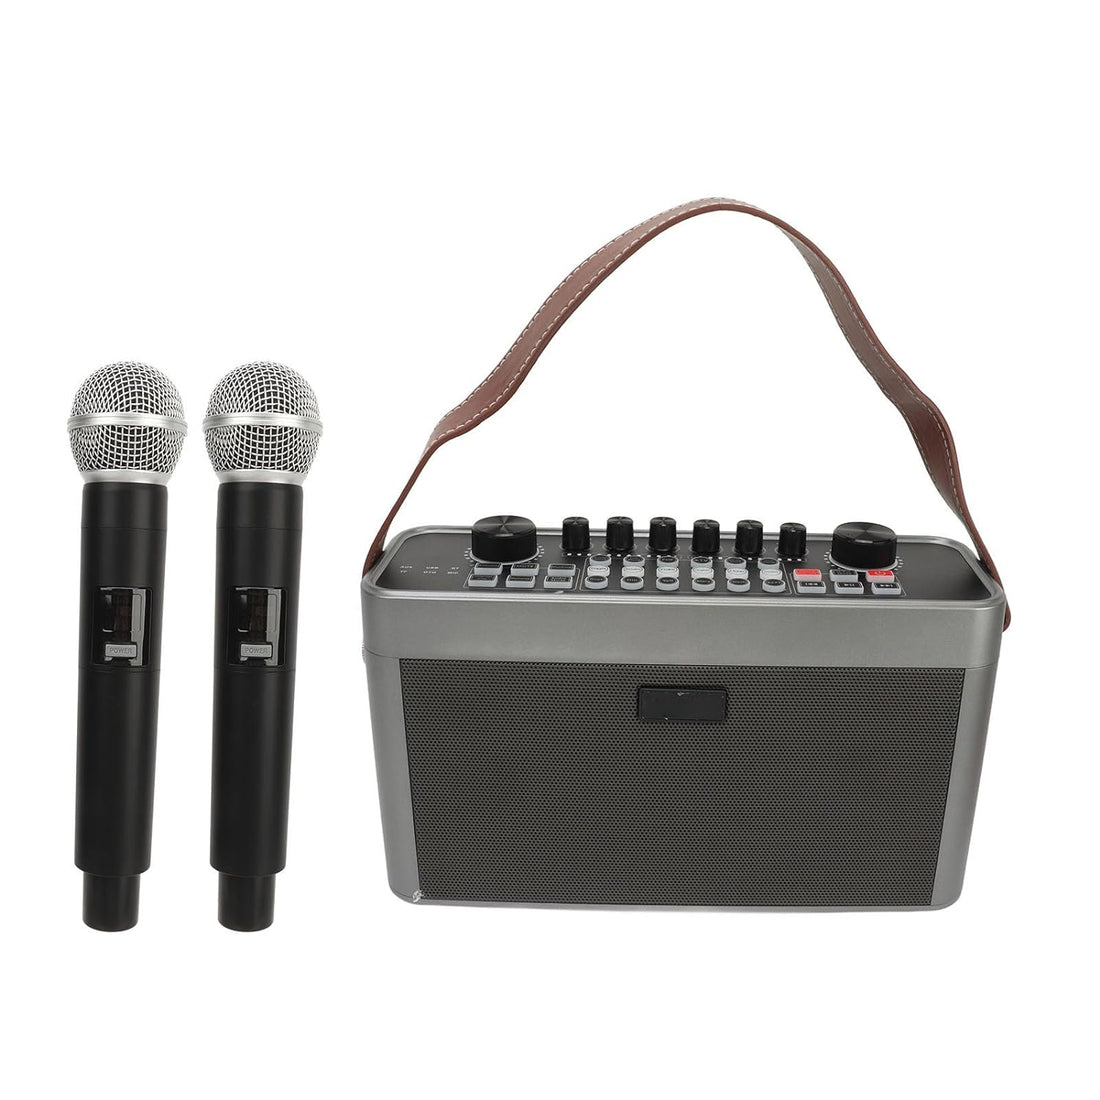 Portable Karaoke Machine with 2 Wireless Microphones, Remote Controls, Portable Bluetooth Speaker with Bass Treble Adjustment, Compatible with iOS Android Windows